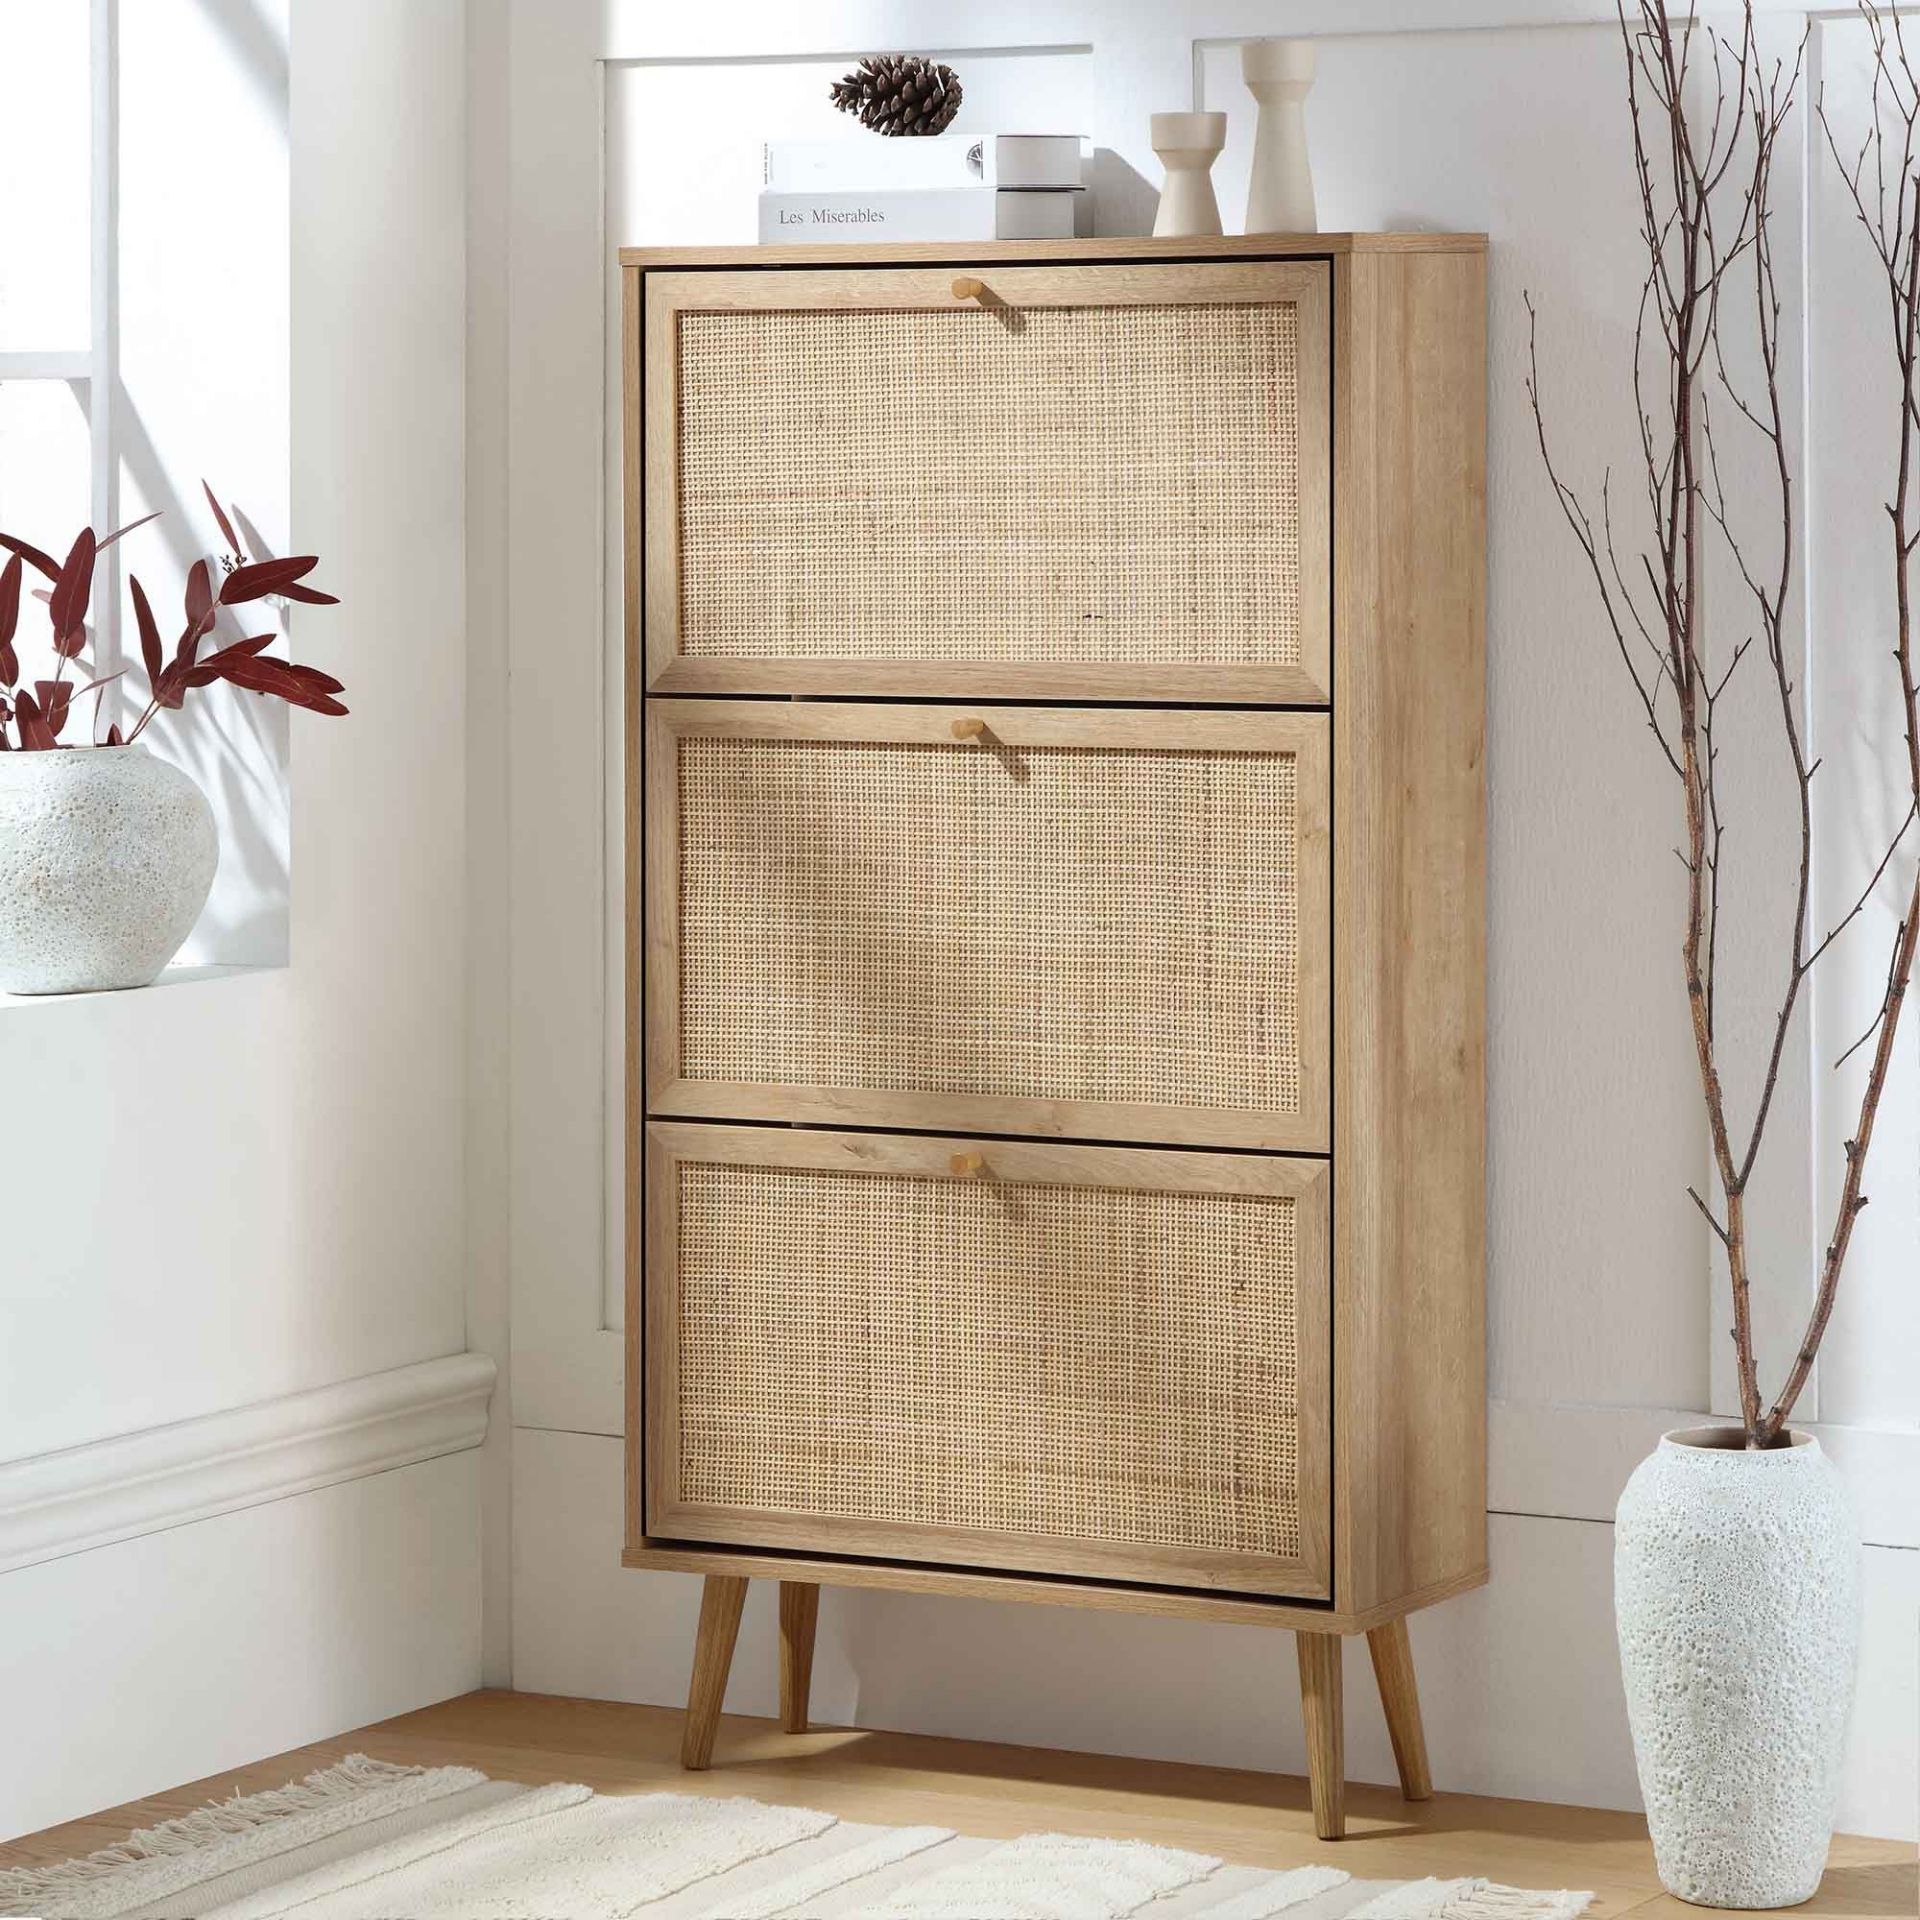 Frances Rattan 3 Tier Shoe Storage Cabinet, Natural. - R19.5. RRP £239.99. The cabinet has 3 tiers